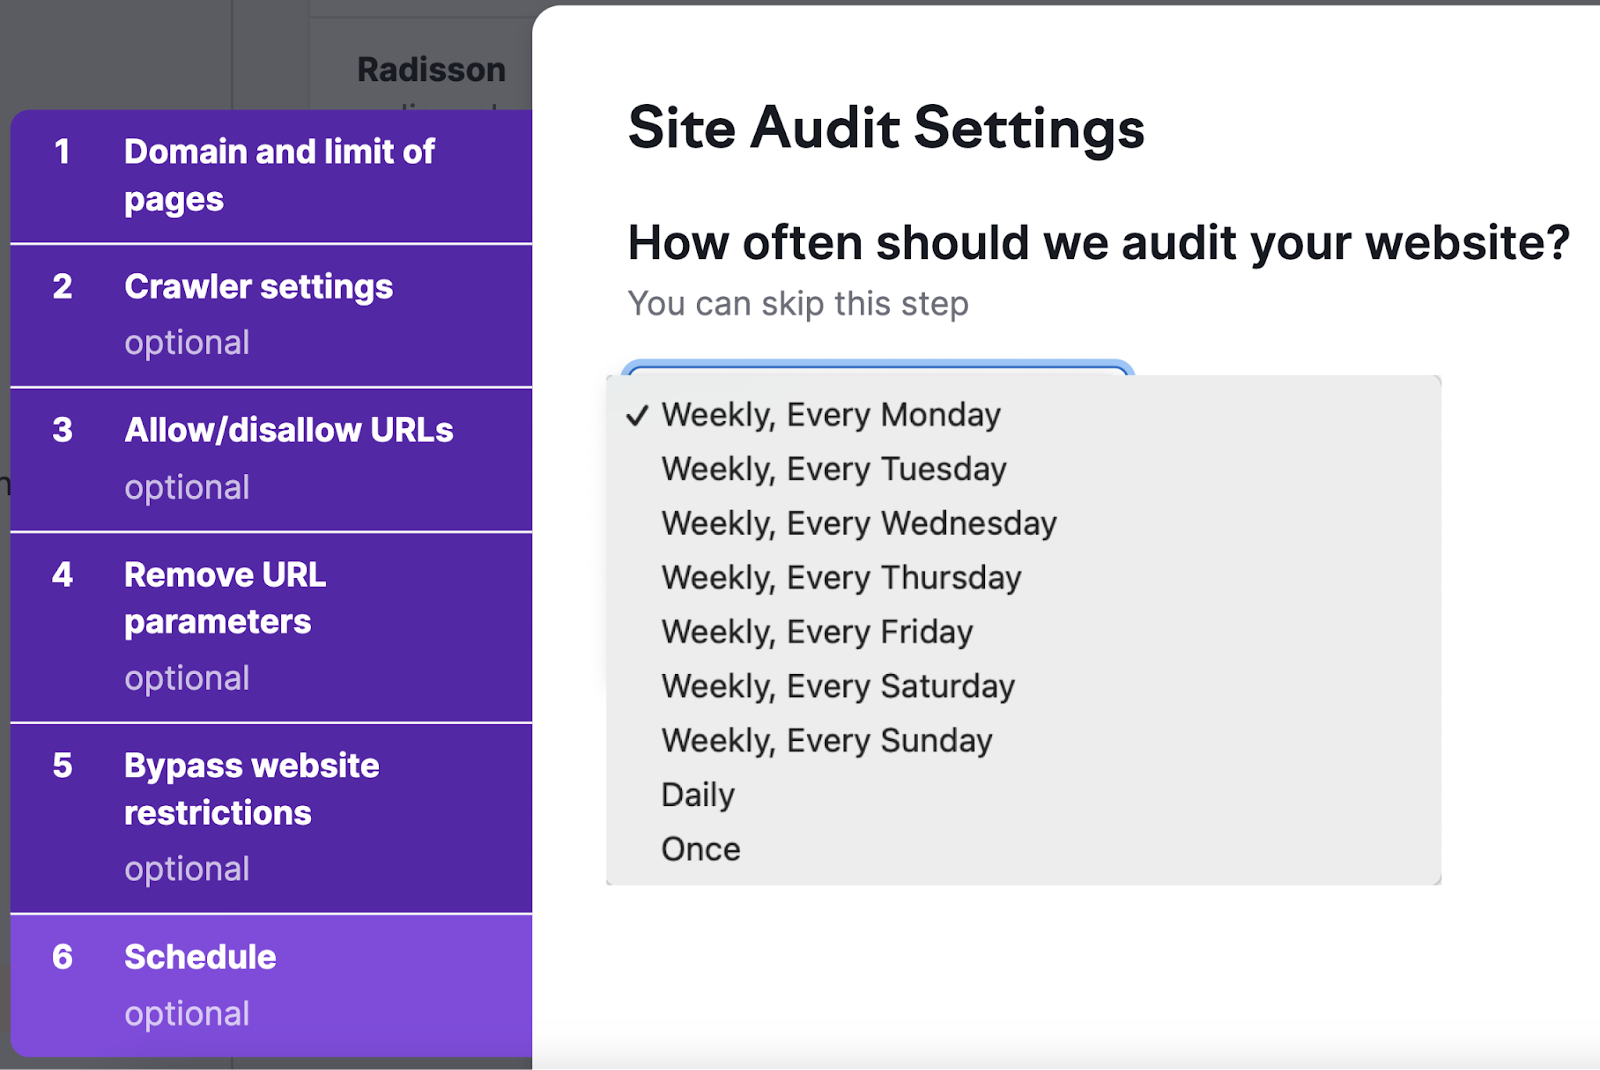 Site Audit scheduling options